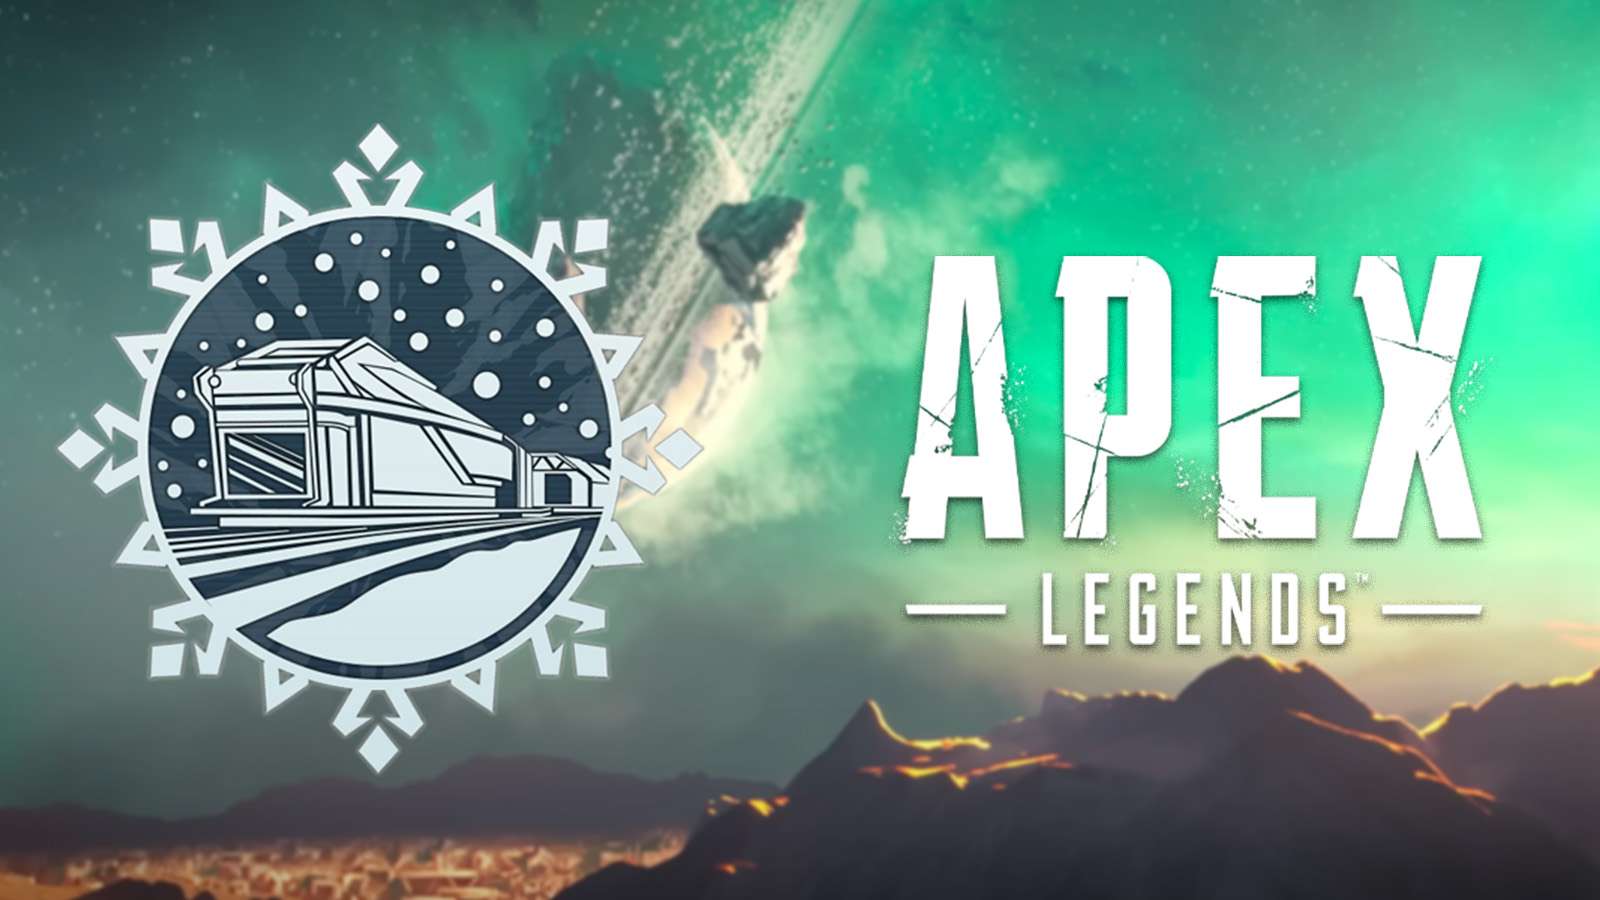 Winter Express and Apex Legends logo on Moon background